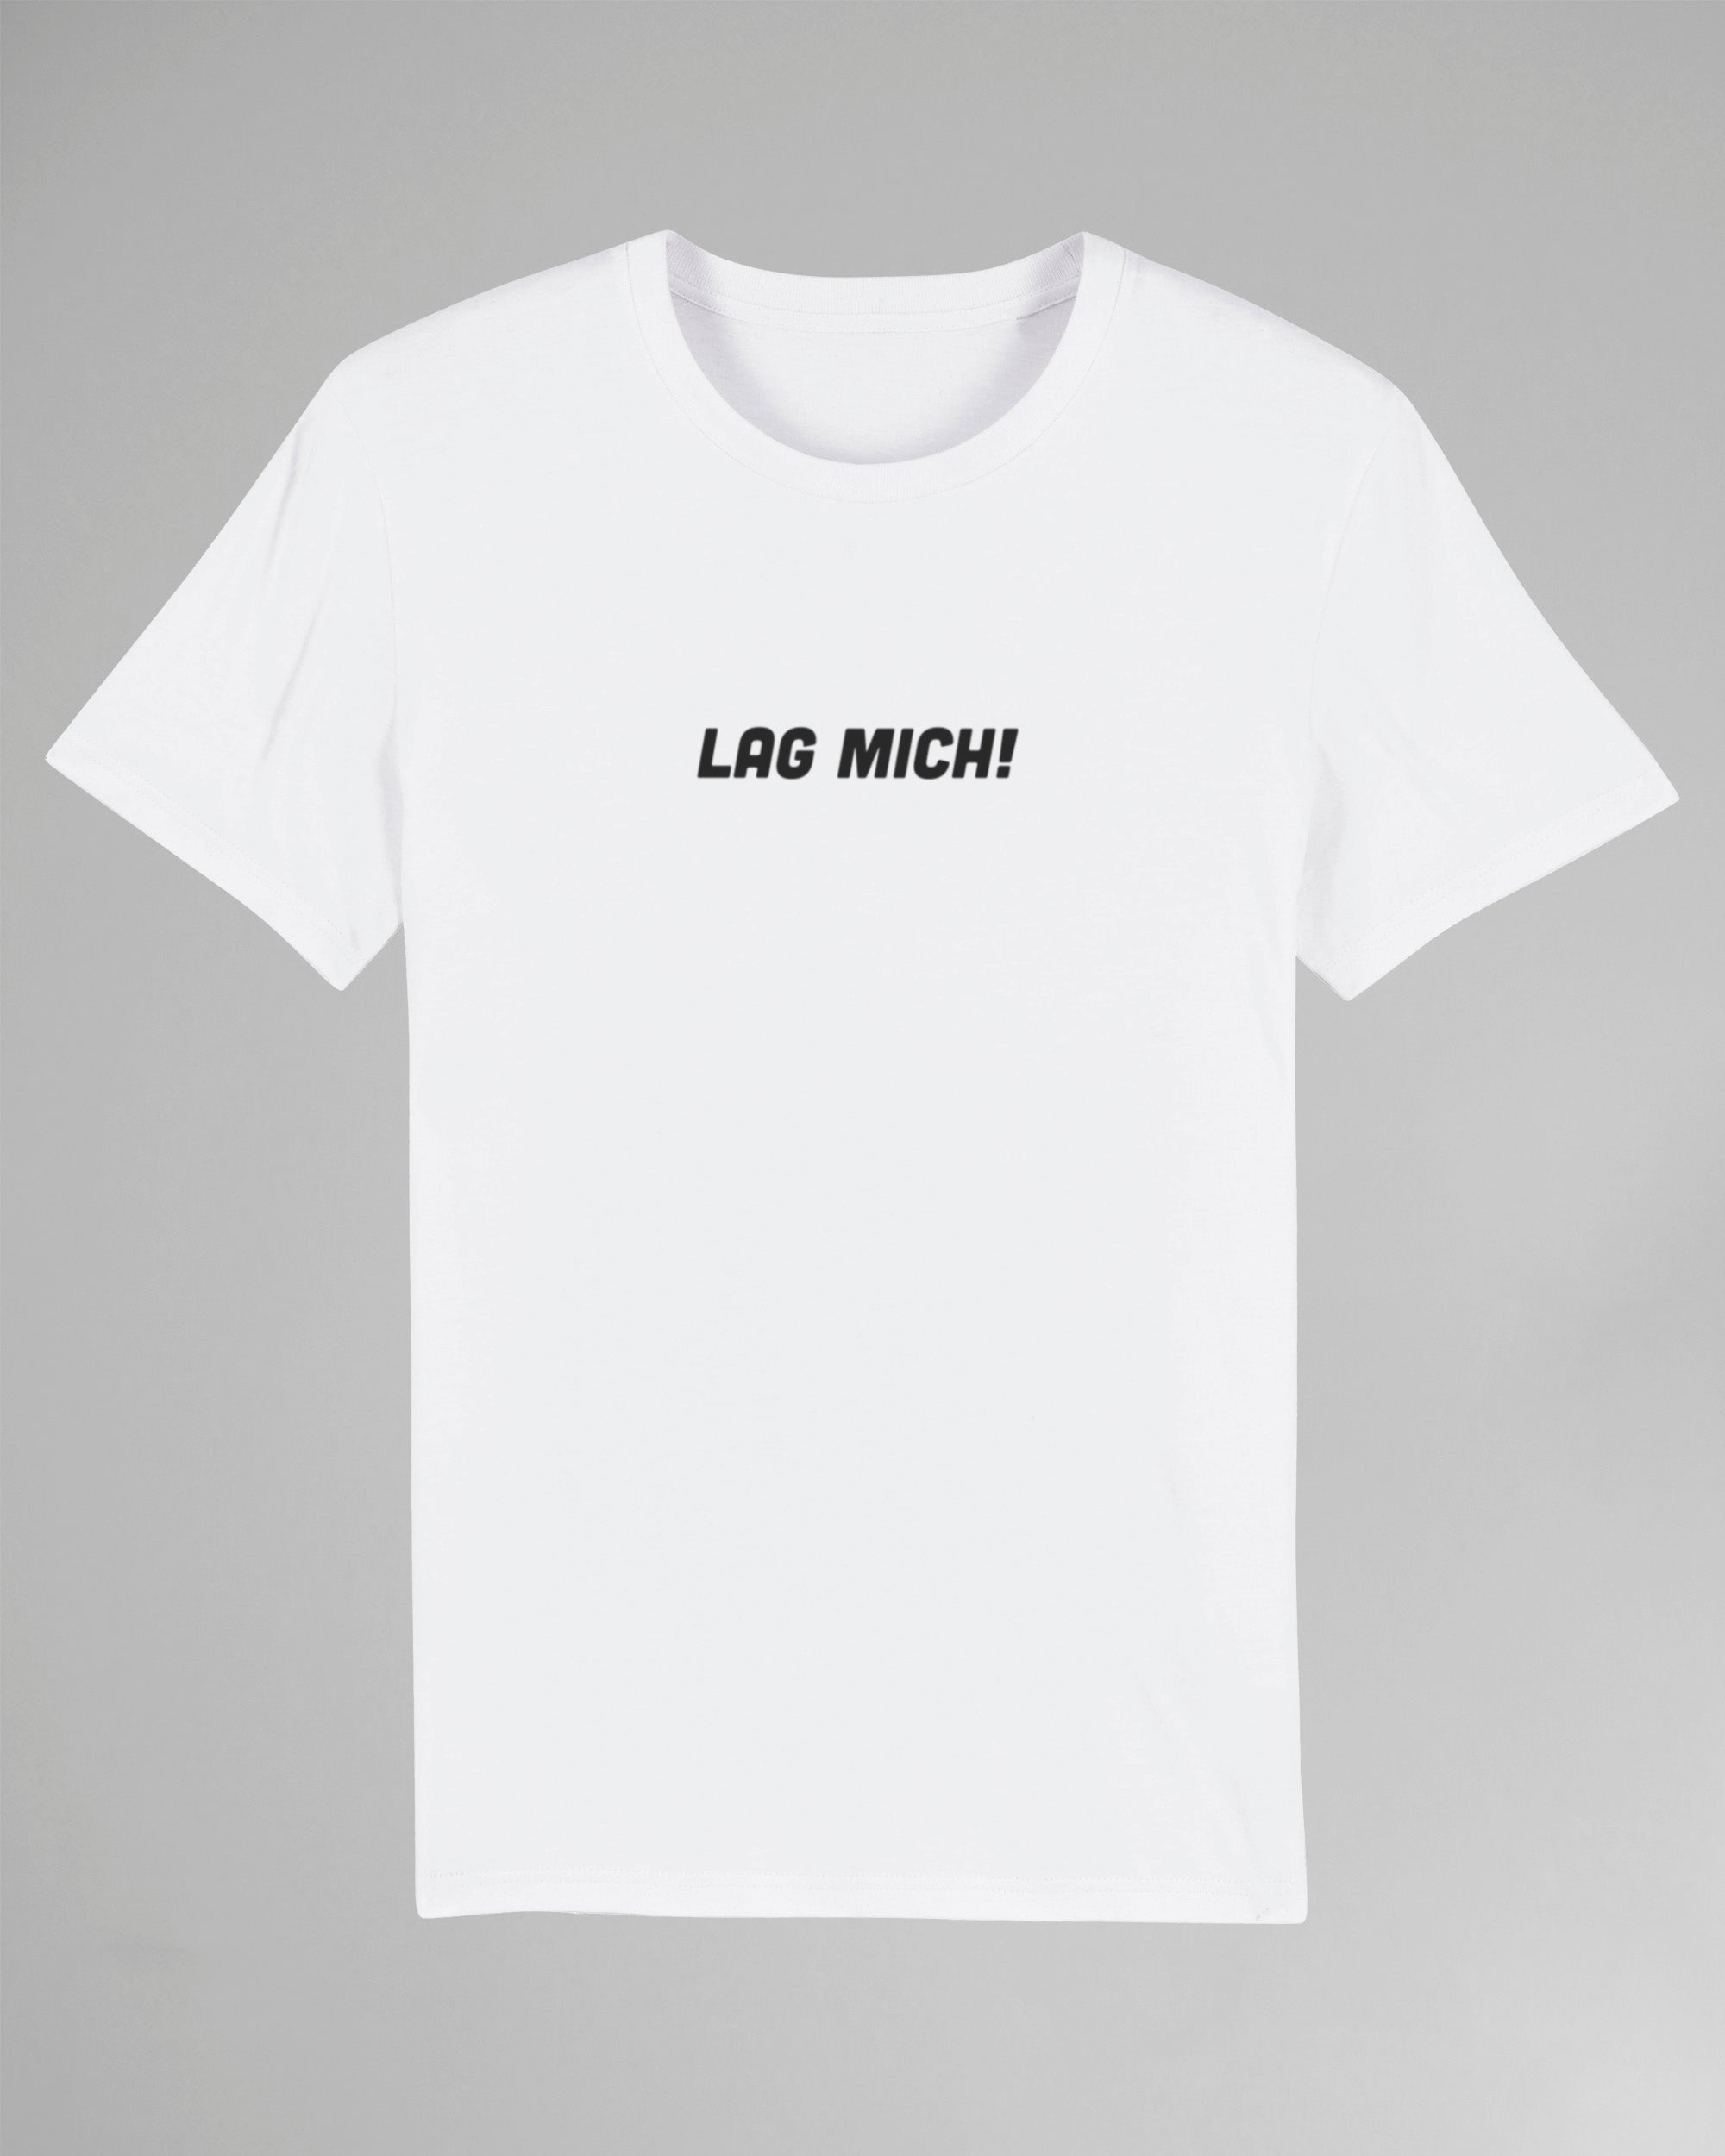 Lag mich! | 3-Style T-Shirt